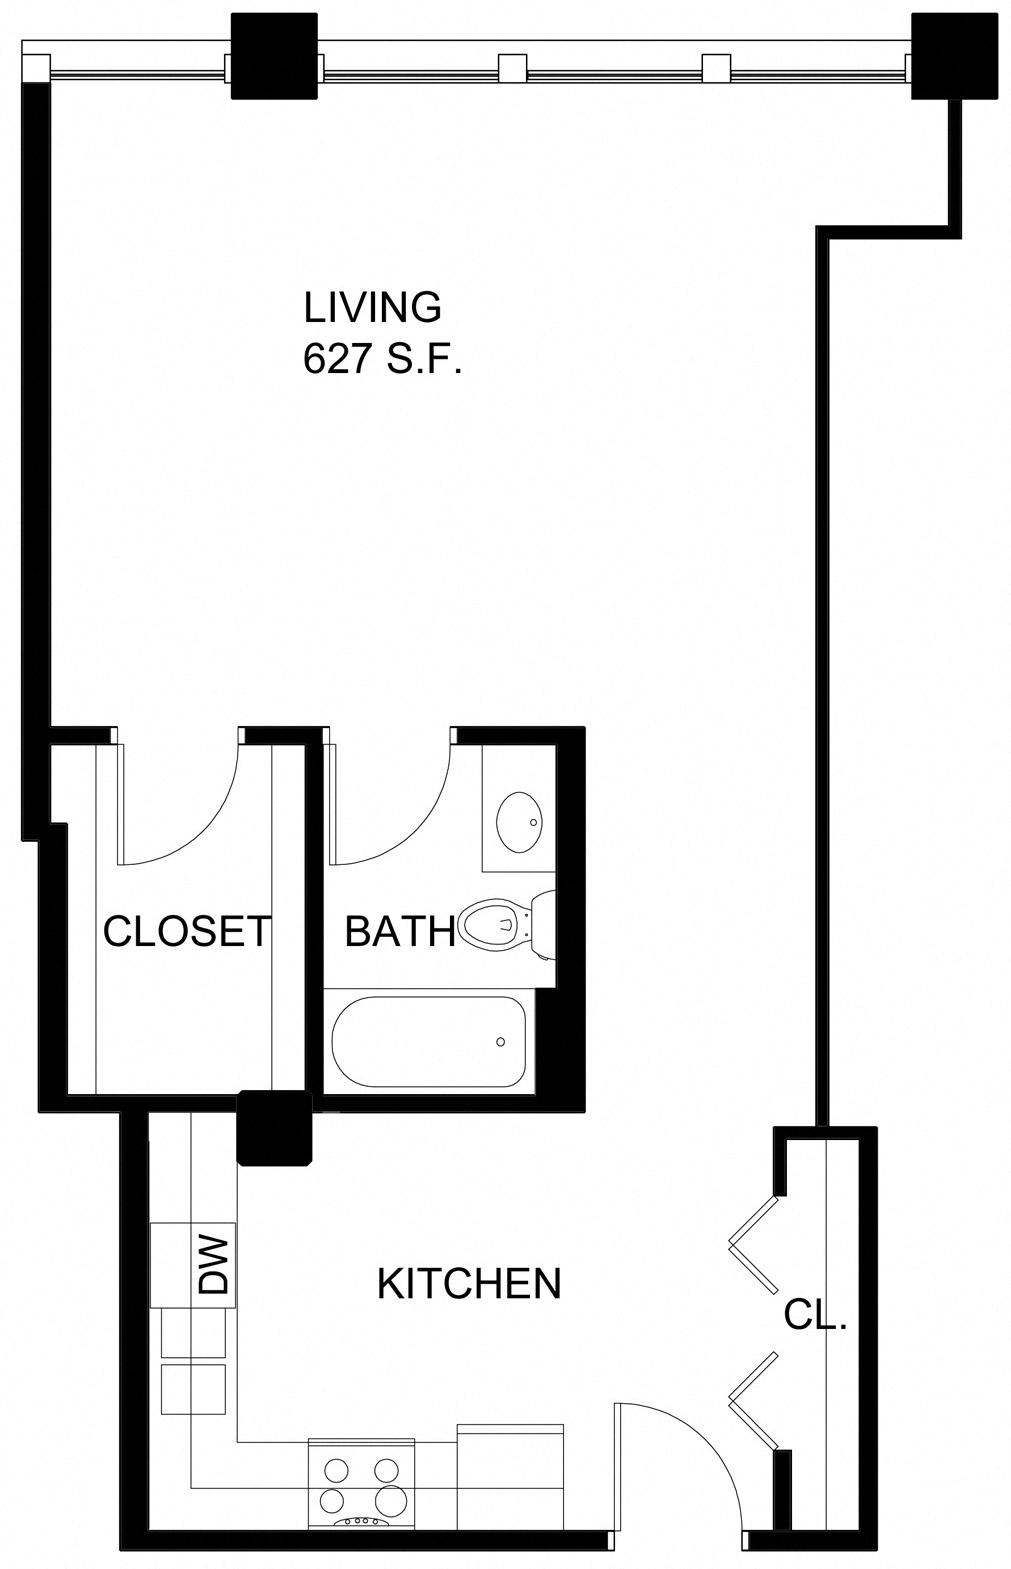 Floorplan for Apartment #P211A, 0 bedroom unit at Halstead Providence